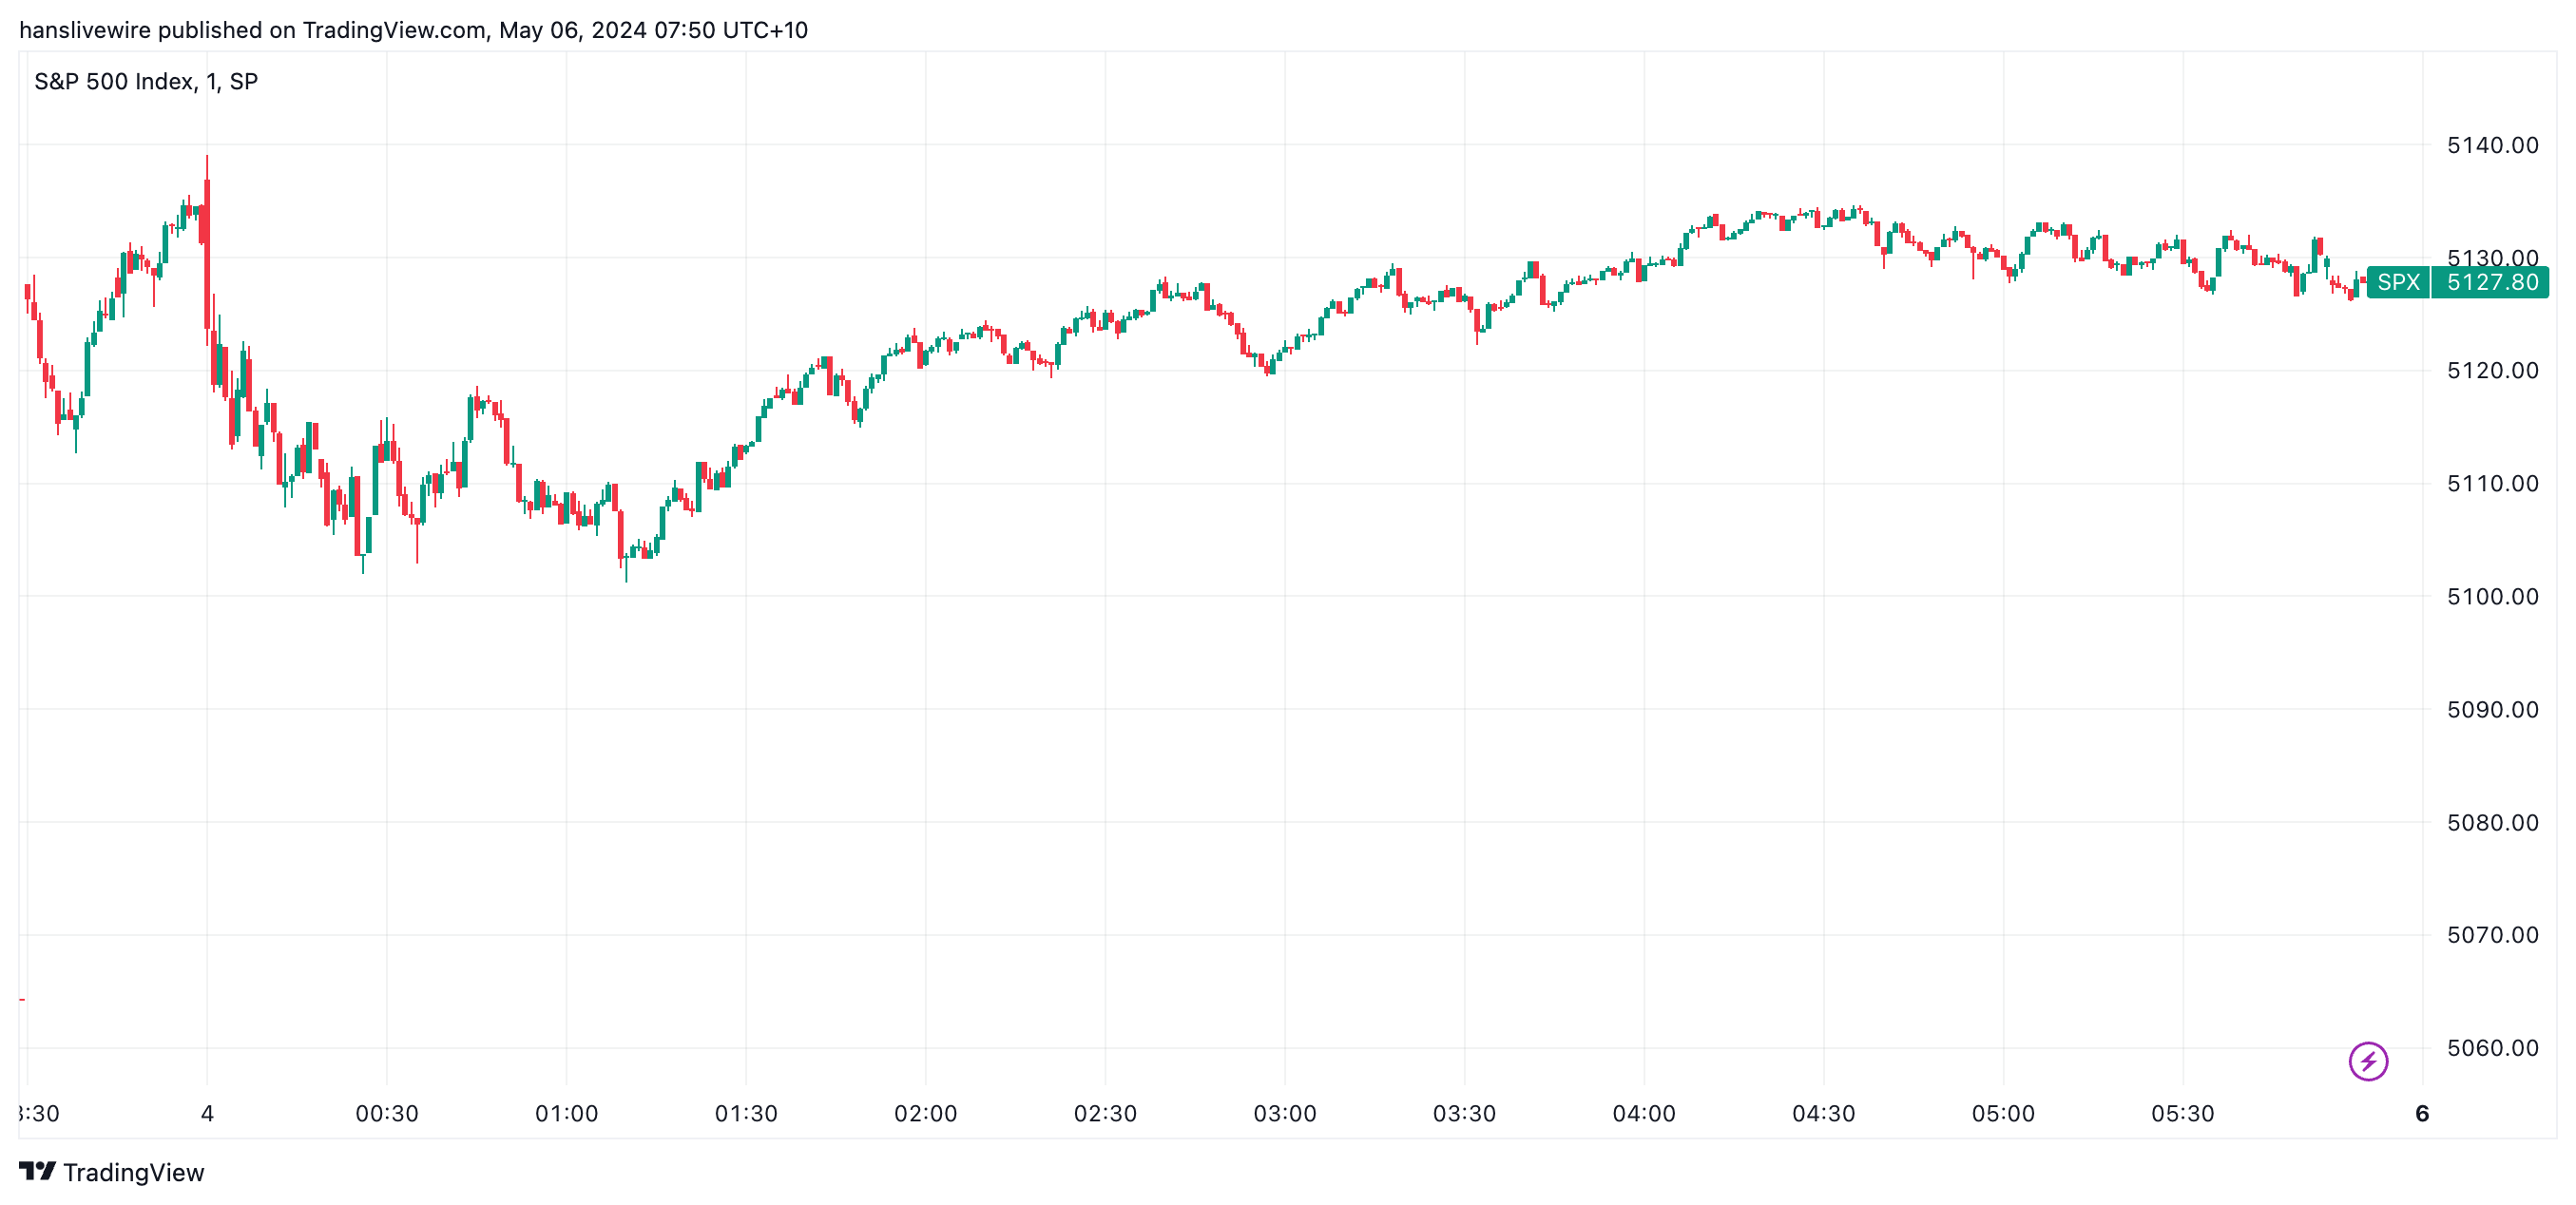 Bad news in the economy is seen as good news for stocks. (Source: TradingView)